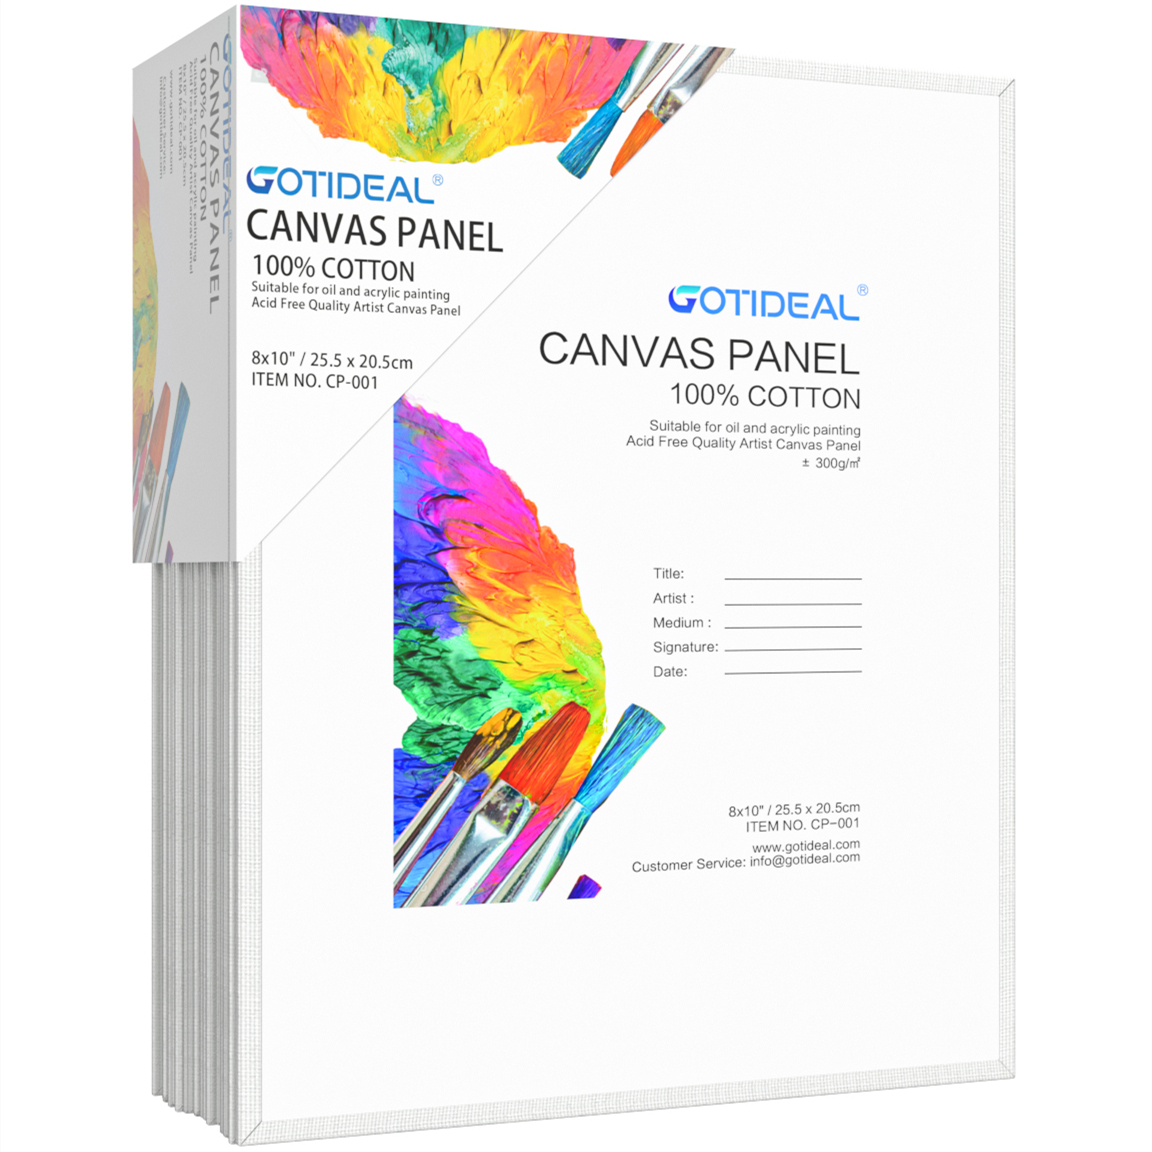 GOTIDEAL Canvas Panels 24 Pack - 8 x 10 inch Professional White Blank- 100% Cotton Artist Canvas Boards for Painting, Acrylic Paint, Oil Paint & Wet Art Media, Canvases for Hobby Painters & Beginner